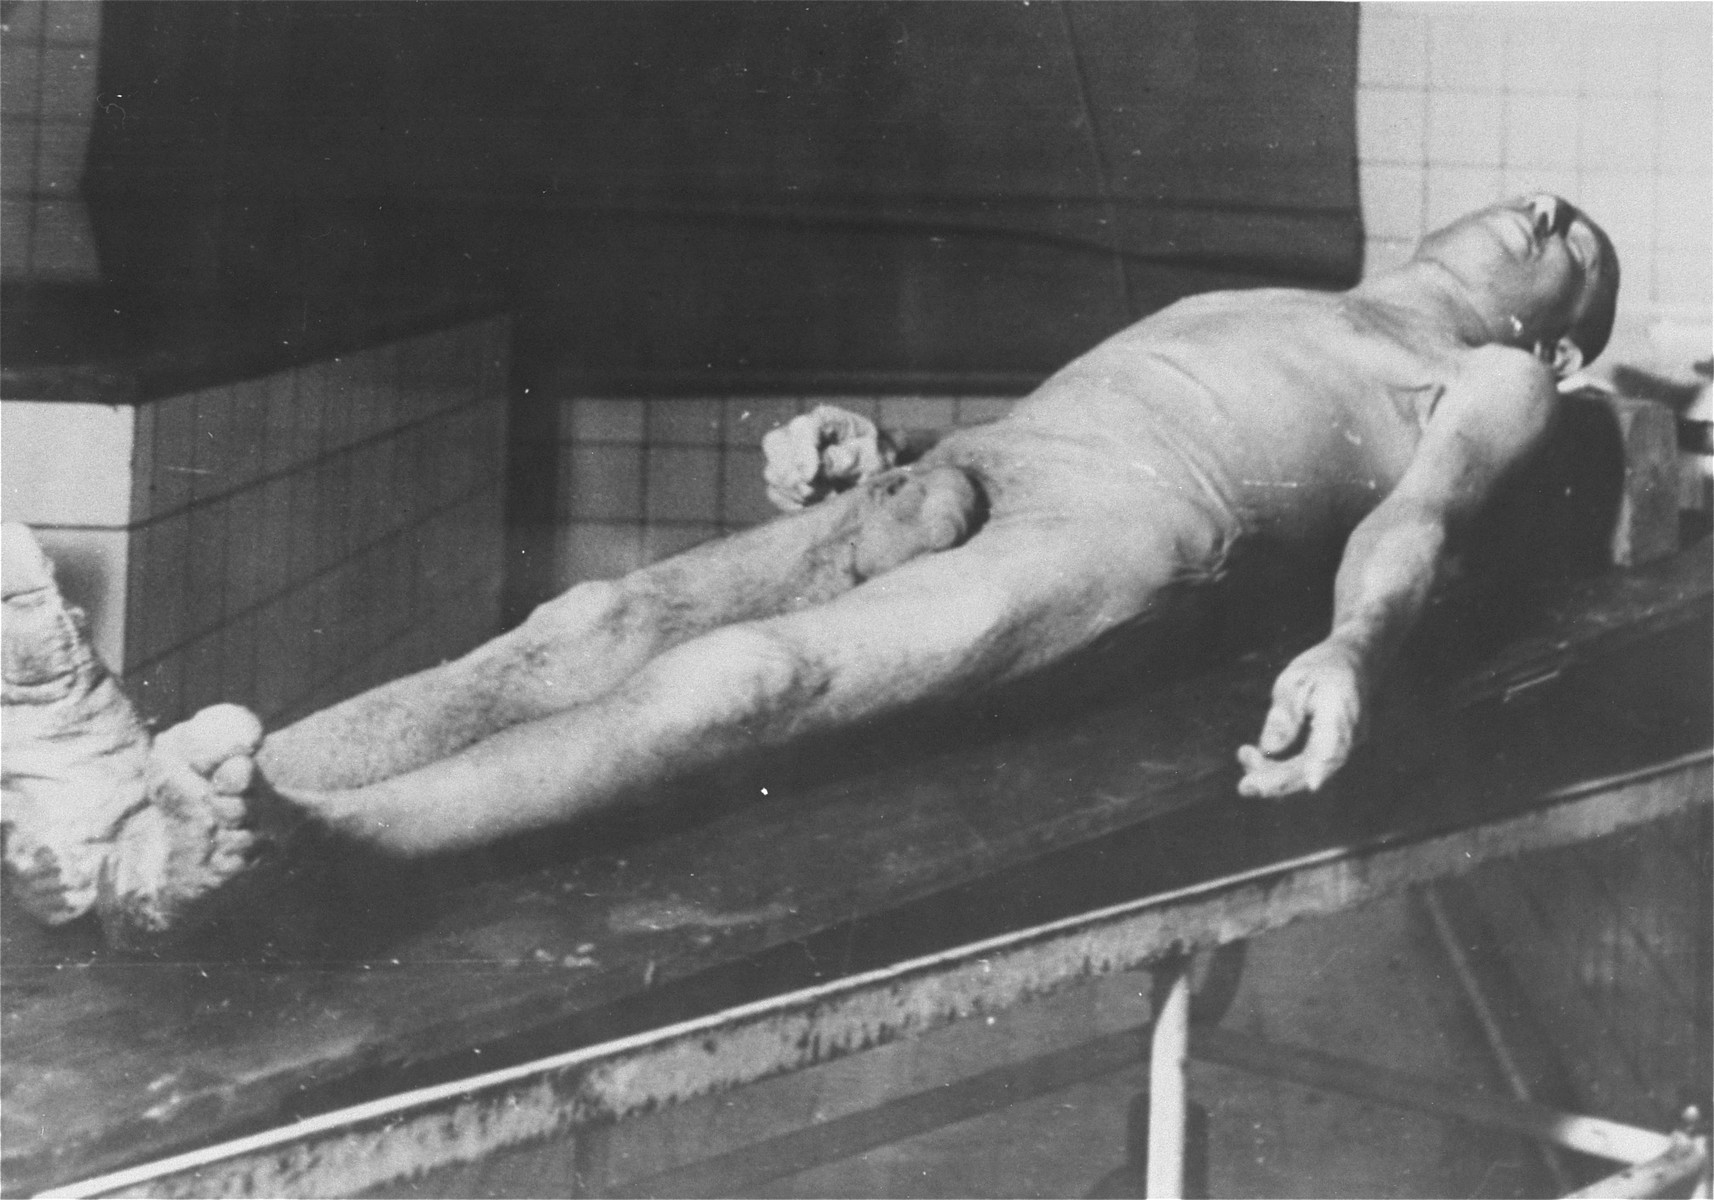 The corpse of a Jewish man found in an alcohol-filled vat at the Strasbourg University Anatomical Institute.

At the end of August,1943, eighty-six Jews, including 30 women, were gassed in Natzweiler-Struthof for the purpose of constructing a collection of skulls and skeletons to be kept at the Strasbourg University Institute of Anatomy, under the directorship of August Hirt.  The individuals were "selected" at Auschwitz for their special bone structure and transferred to Natzweiler, where SS Captain Josef Kramer, the commandant of the camp, oversaw the operation.  The corpses then remained in vats of alcohol for over a year, the project envisioned by Hirt having never been completed.  When Allied forces approached Strasbourg in November 1944, SS administrators were unaware that evidence of the crime still existed at the Institute, and only at the last minute ordered the bodies destroyed.  This operation failed, however, and 16-17 of the bodies fell into Allied hands. [Klarsfeld, S., ed. The Struthof Album, 1985]